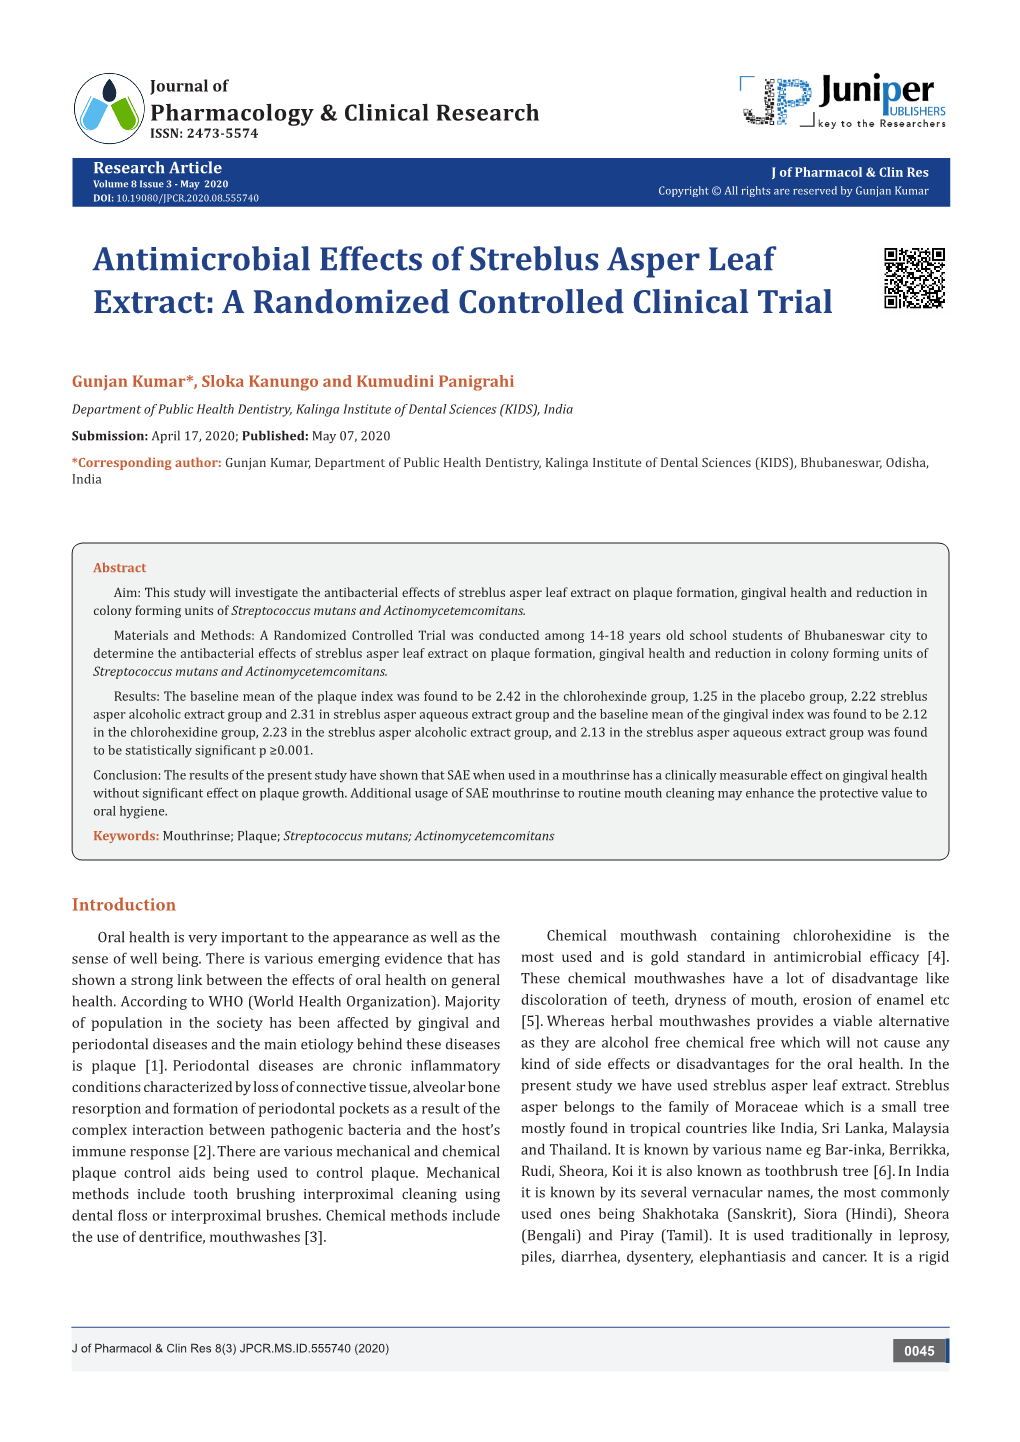 Antimicrobial Effects of Streblus Asper Leaf Extract: a Randomized Controlled Clinical Trial